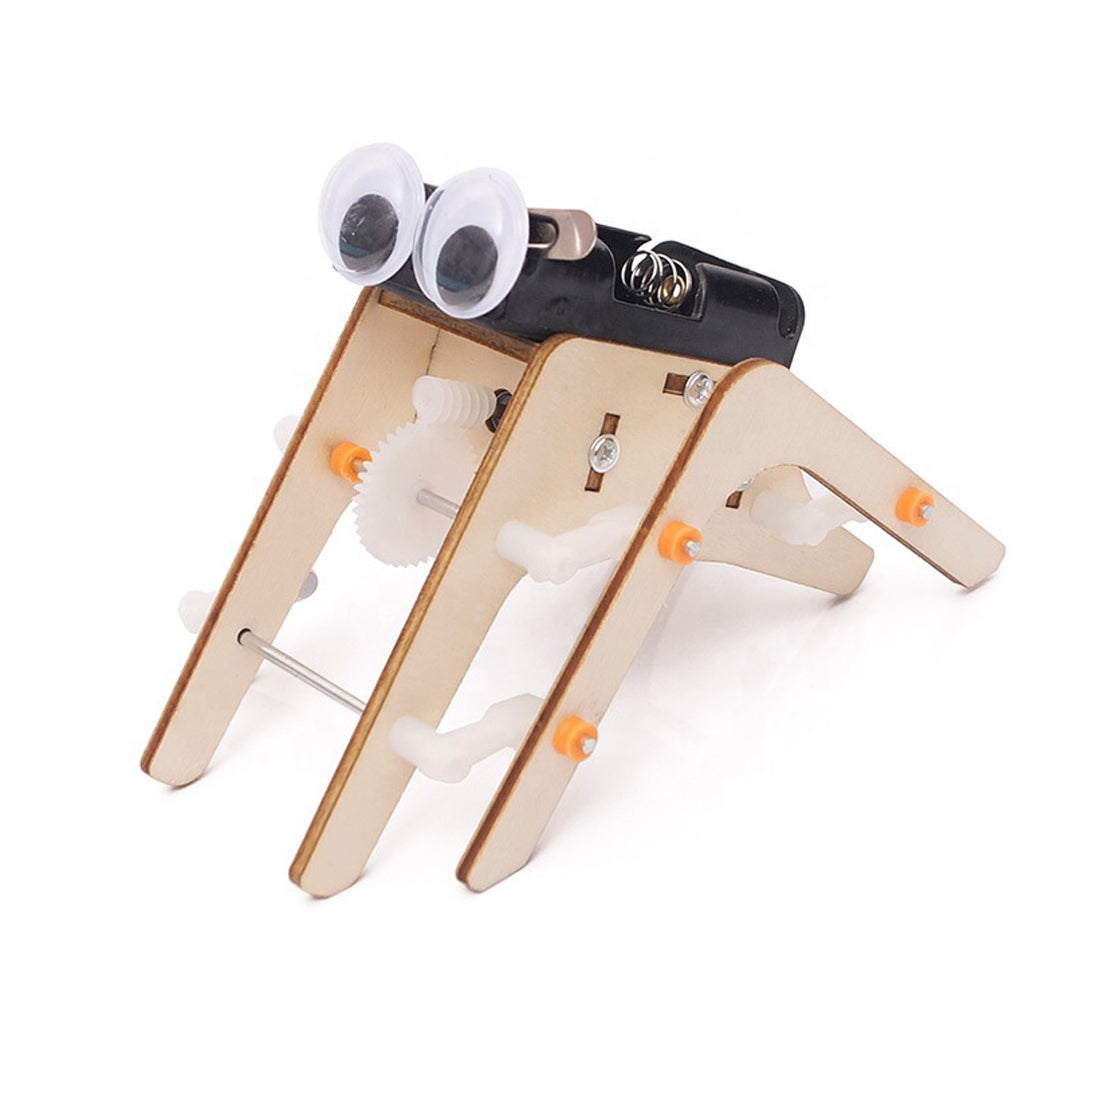 diy-stem-children-playing-science-education-physics-wooden-bionic-moving-spider-robot-toy.jpg